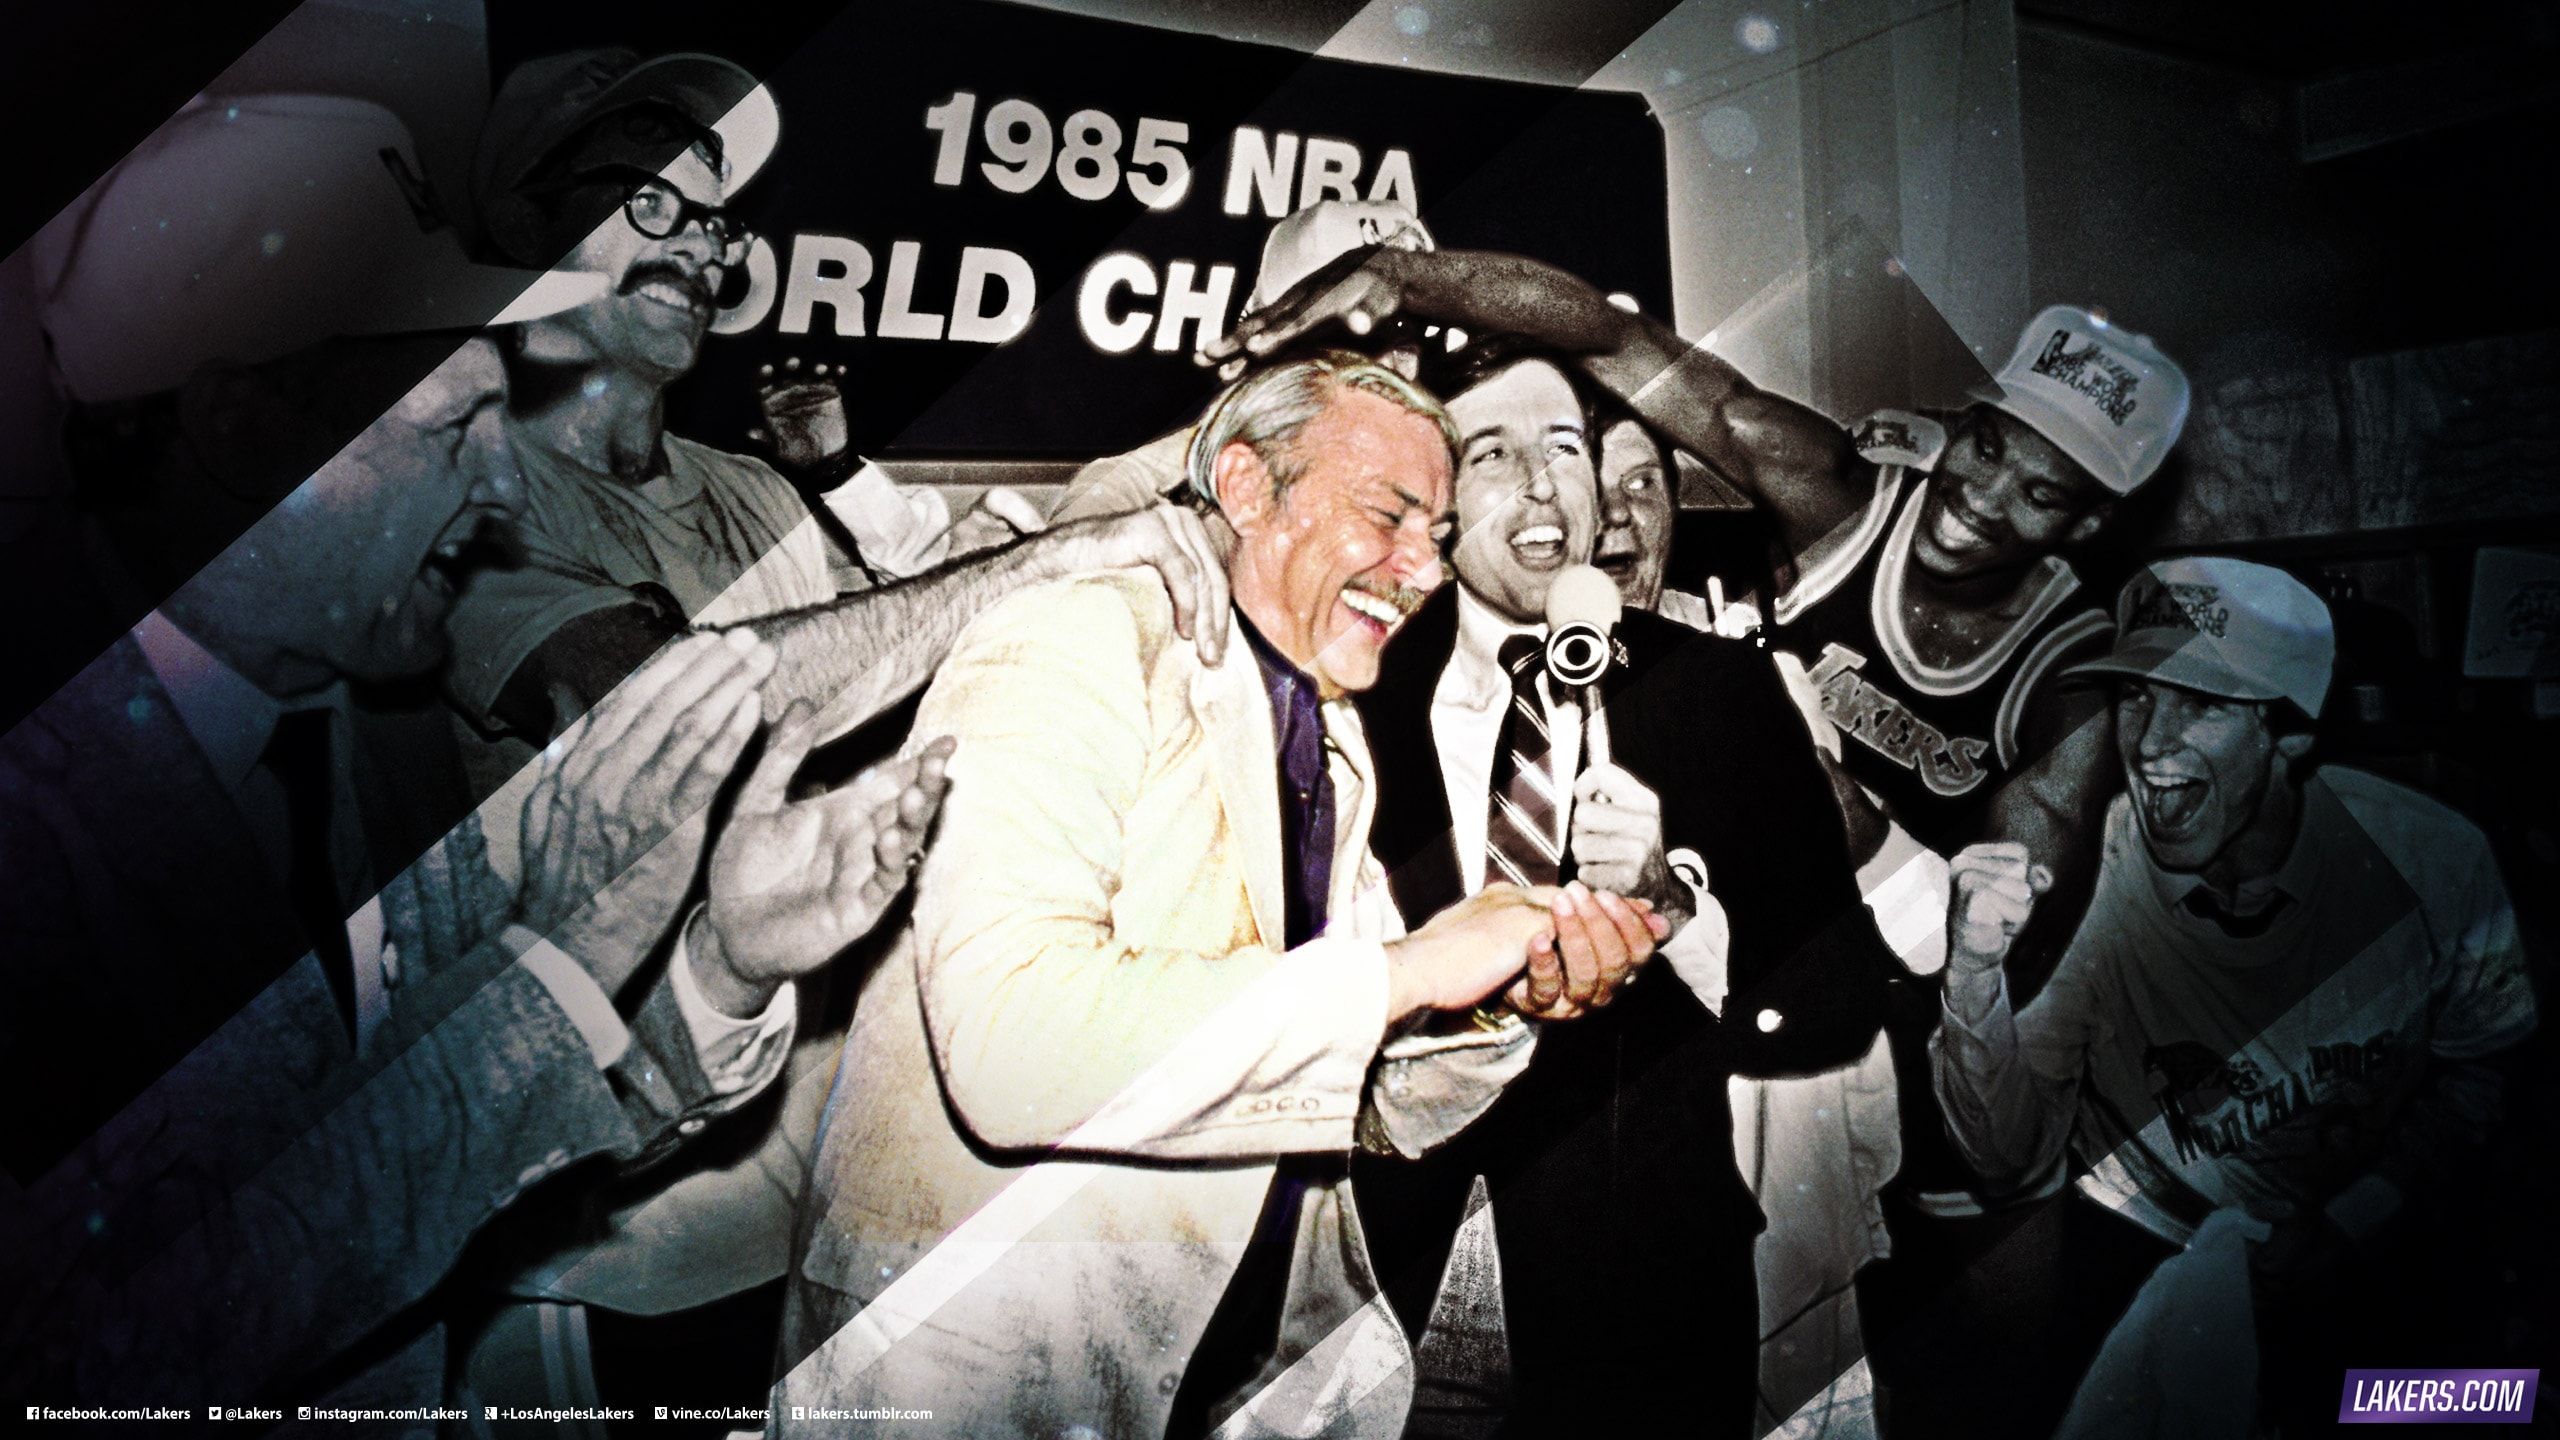 Lakers owner Jerry Buss with the 1985 championship trophy - Los Angeles Lakers